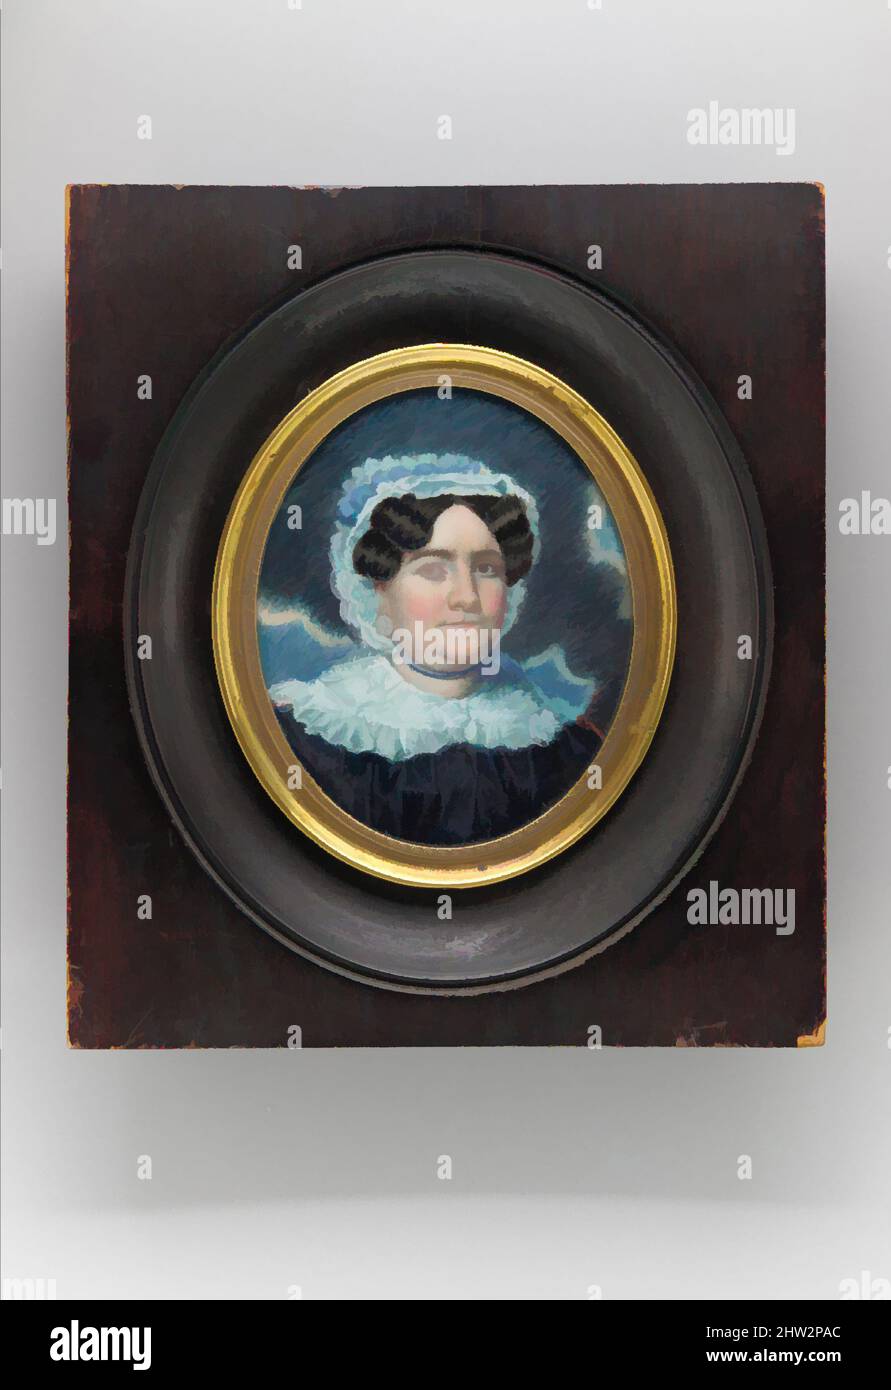 Art inspired by Portrait of a Lady, ca. 1835, Watercolor on ivory, 3 1/8 x 2 1/2 in. (7.9 x 6.4 cm), Paintings, Classic works modernized by Artotop with a splash of modernity. Shapes, color and value, eye-catching visual impact on art. Emotions through freedom of artworks in a contemporary way. A timeless message pursuing a wildly creative new direction. Artists turning to the digital medium and creating the Artotop NFT Stock Photo